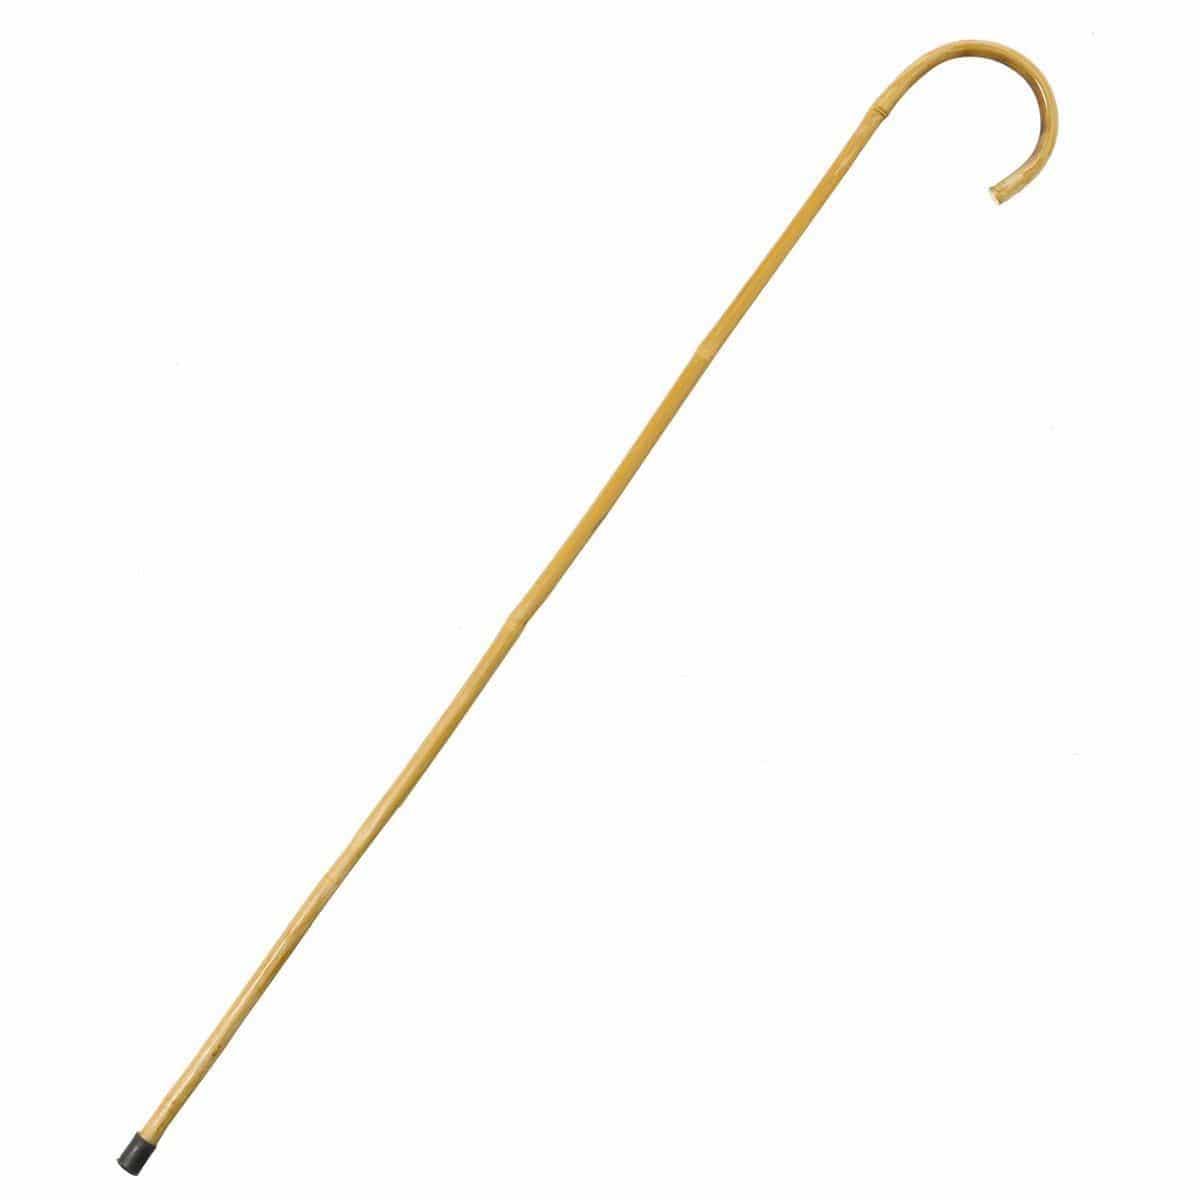 Buy Costume Accessories Bamboo walking cane sold at Party Expert